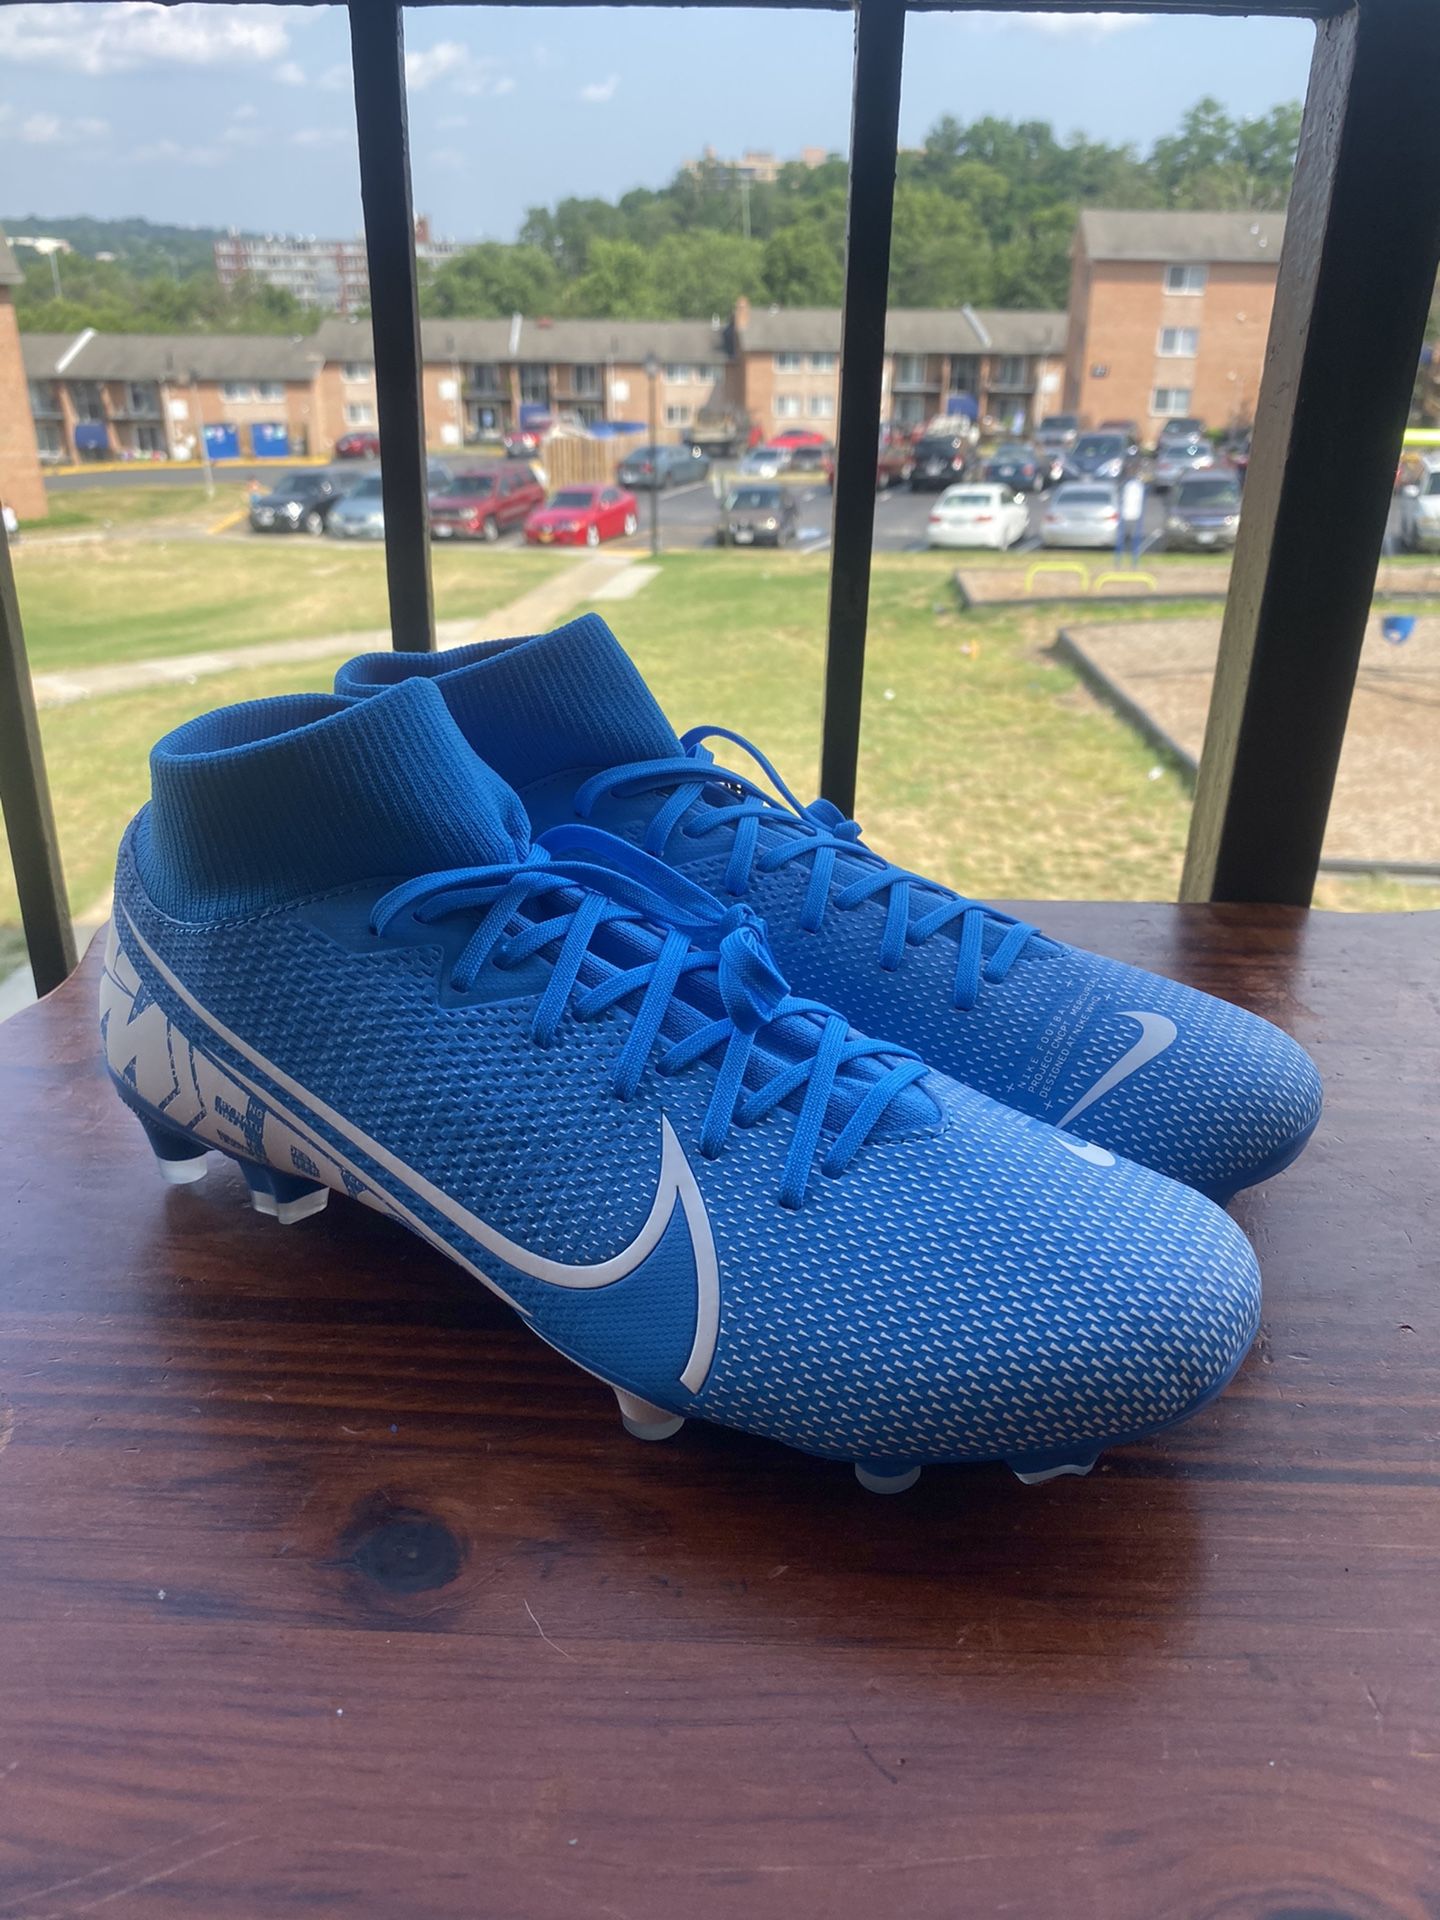 Nike Mercurial Superfly 7 Academy Unisex Soccer Cleats Size 9.5